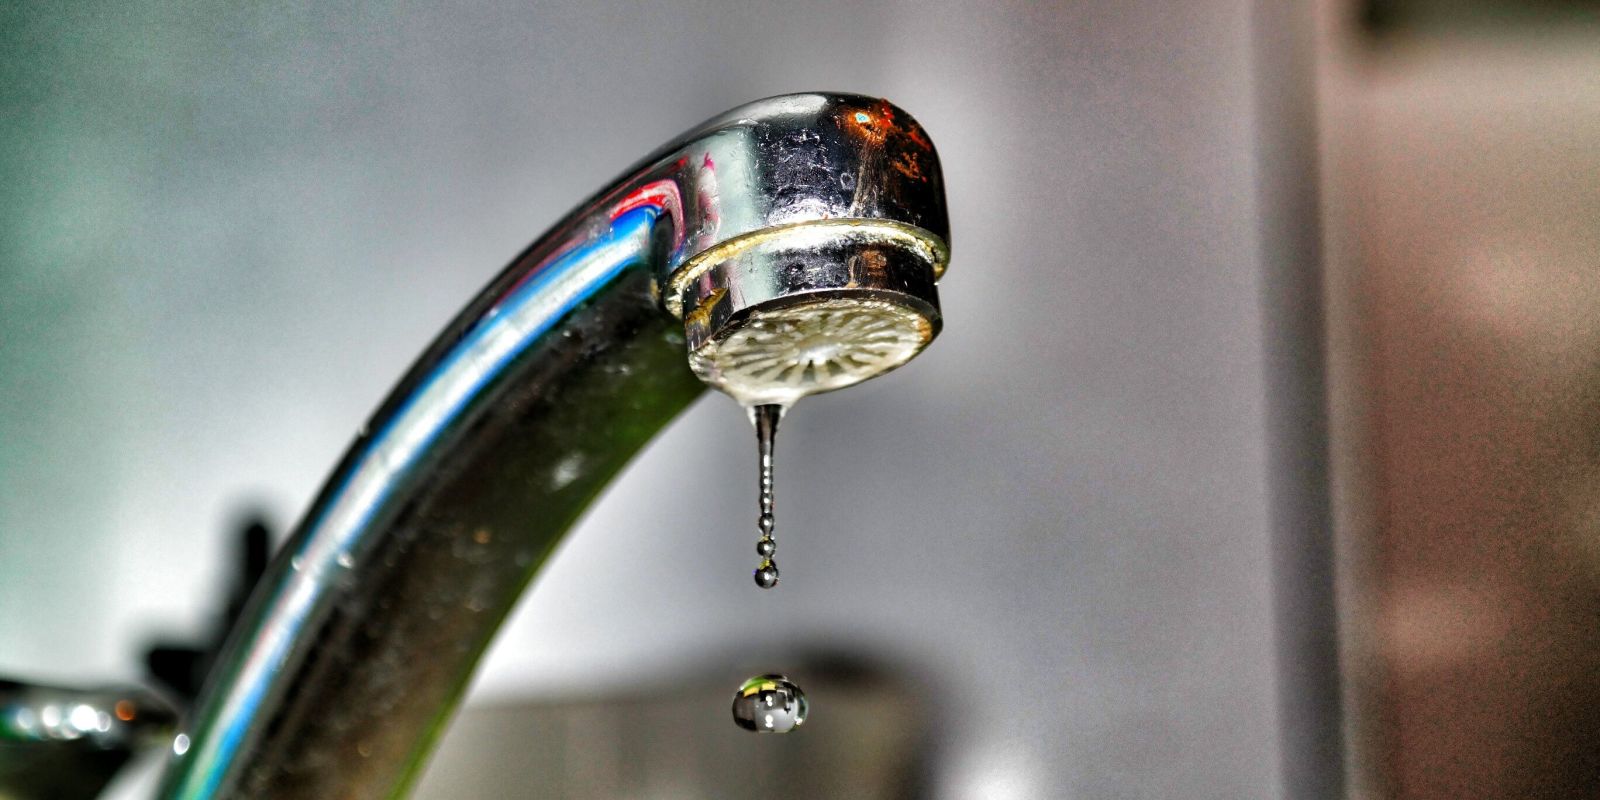 How to fix a leaky tap and save water